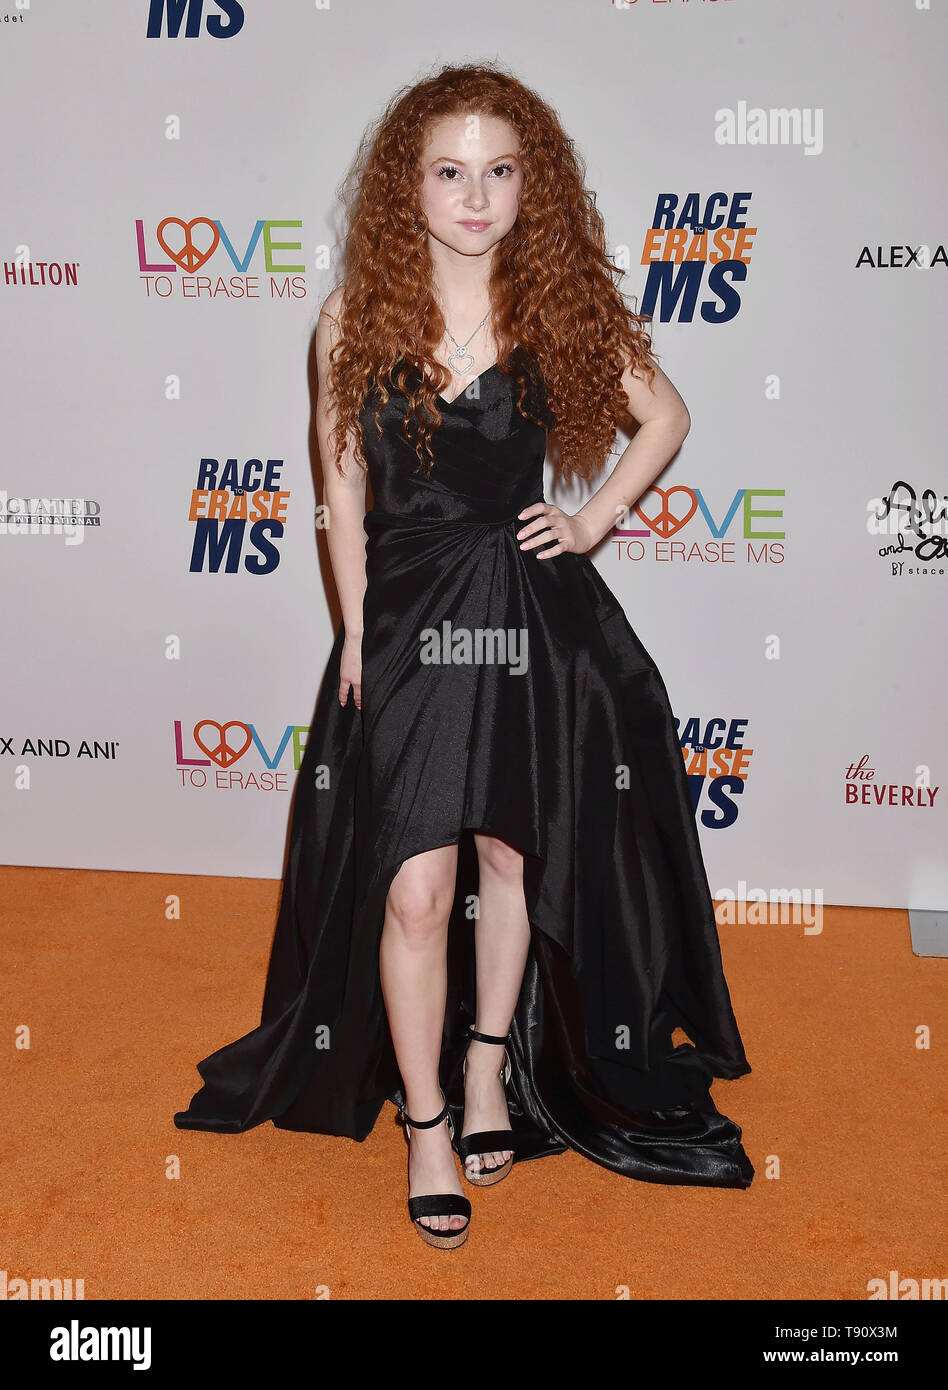 BEVERLY HILLS, CA - MAY 10: Francesca Capaldi  attends the 26th Annual Race to Erase MS Gala at The Beverly Hilton Hotel on May 10, 2019 in Beverly Hills, California. Stock Photo